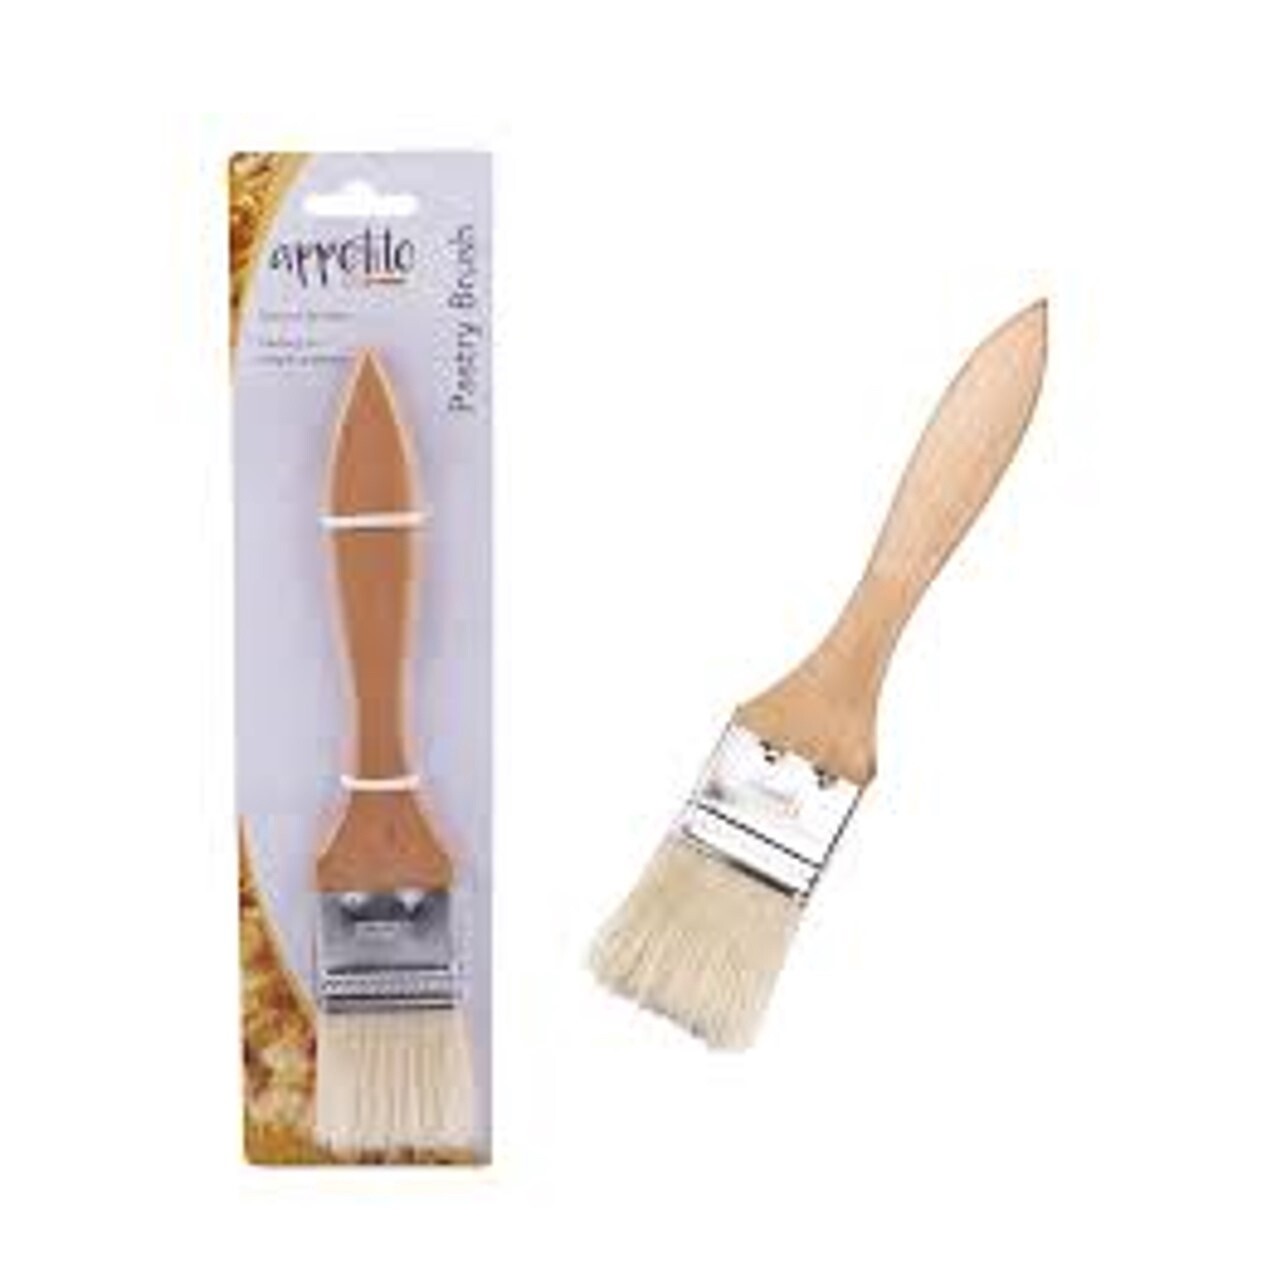 Appetito Pastry Brush